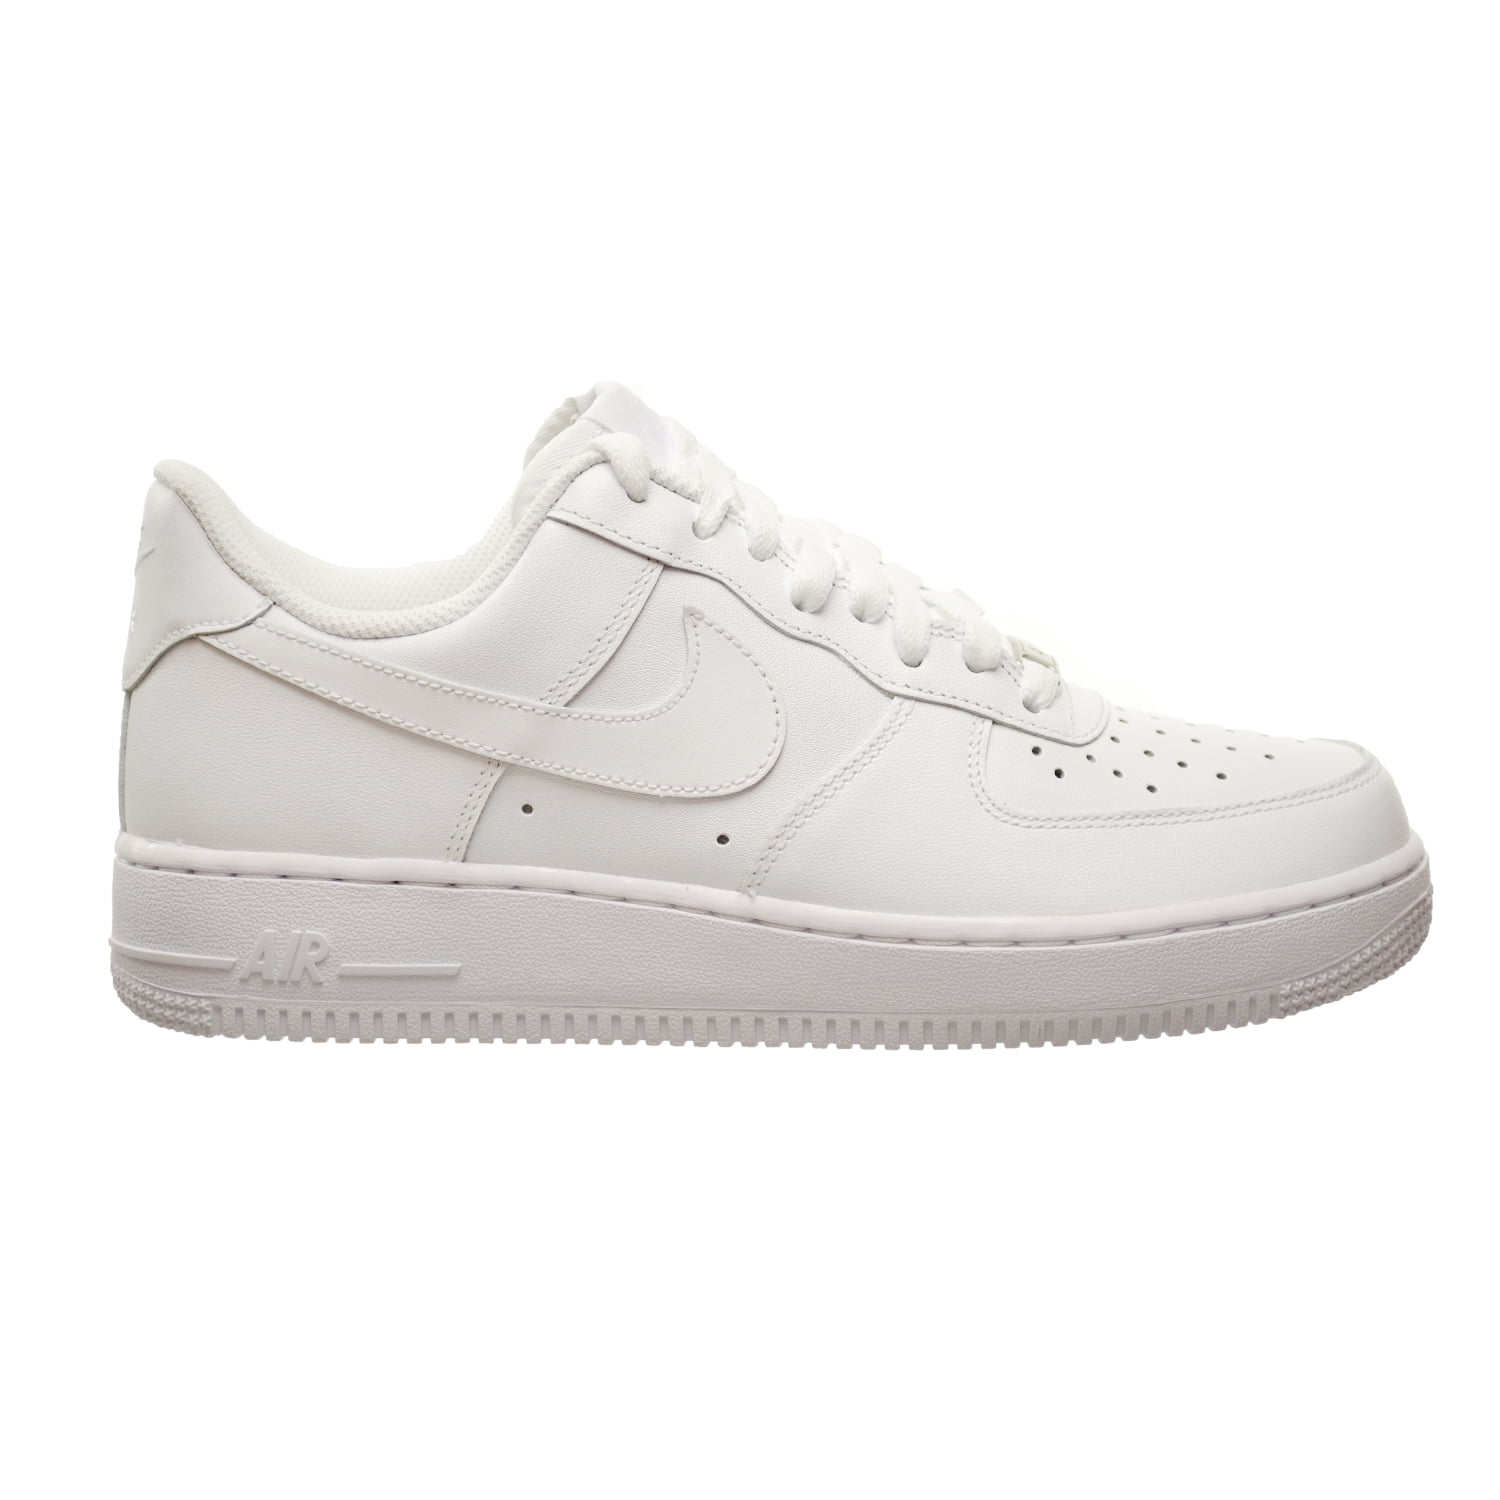 af1 in store near me